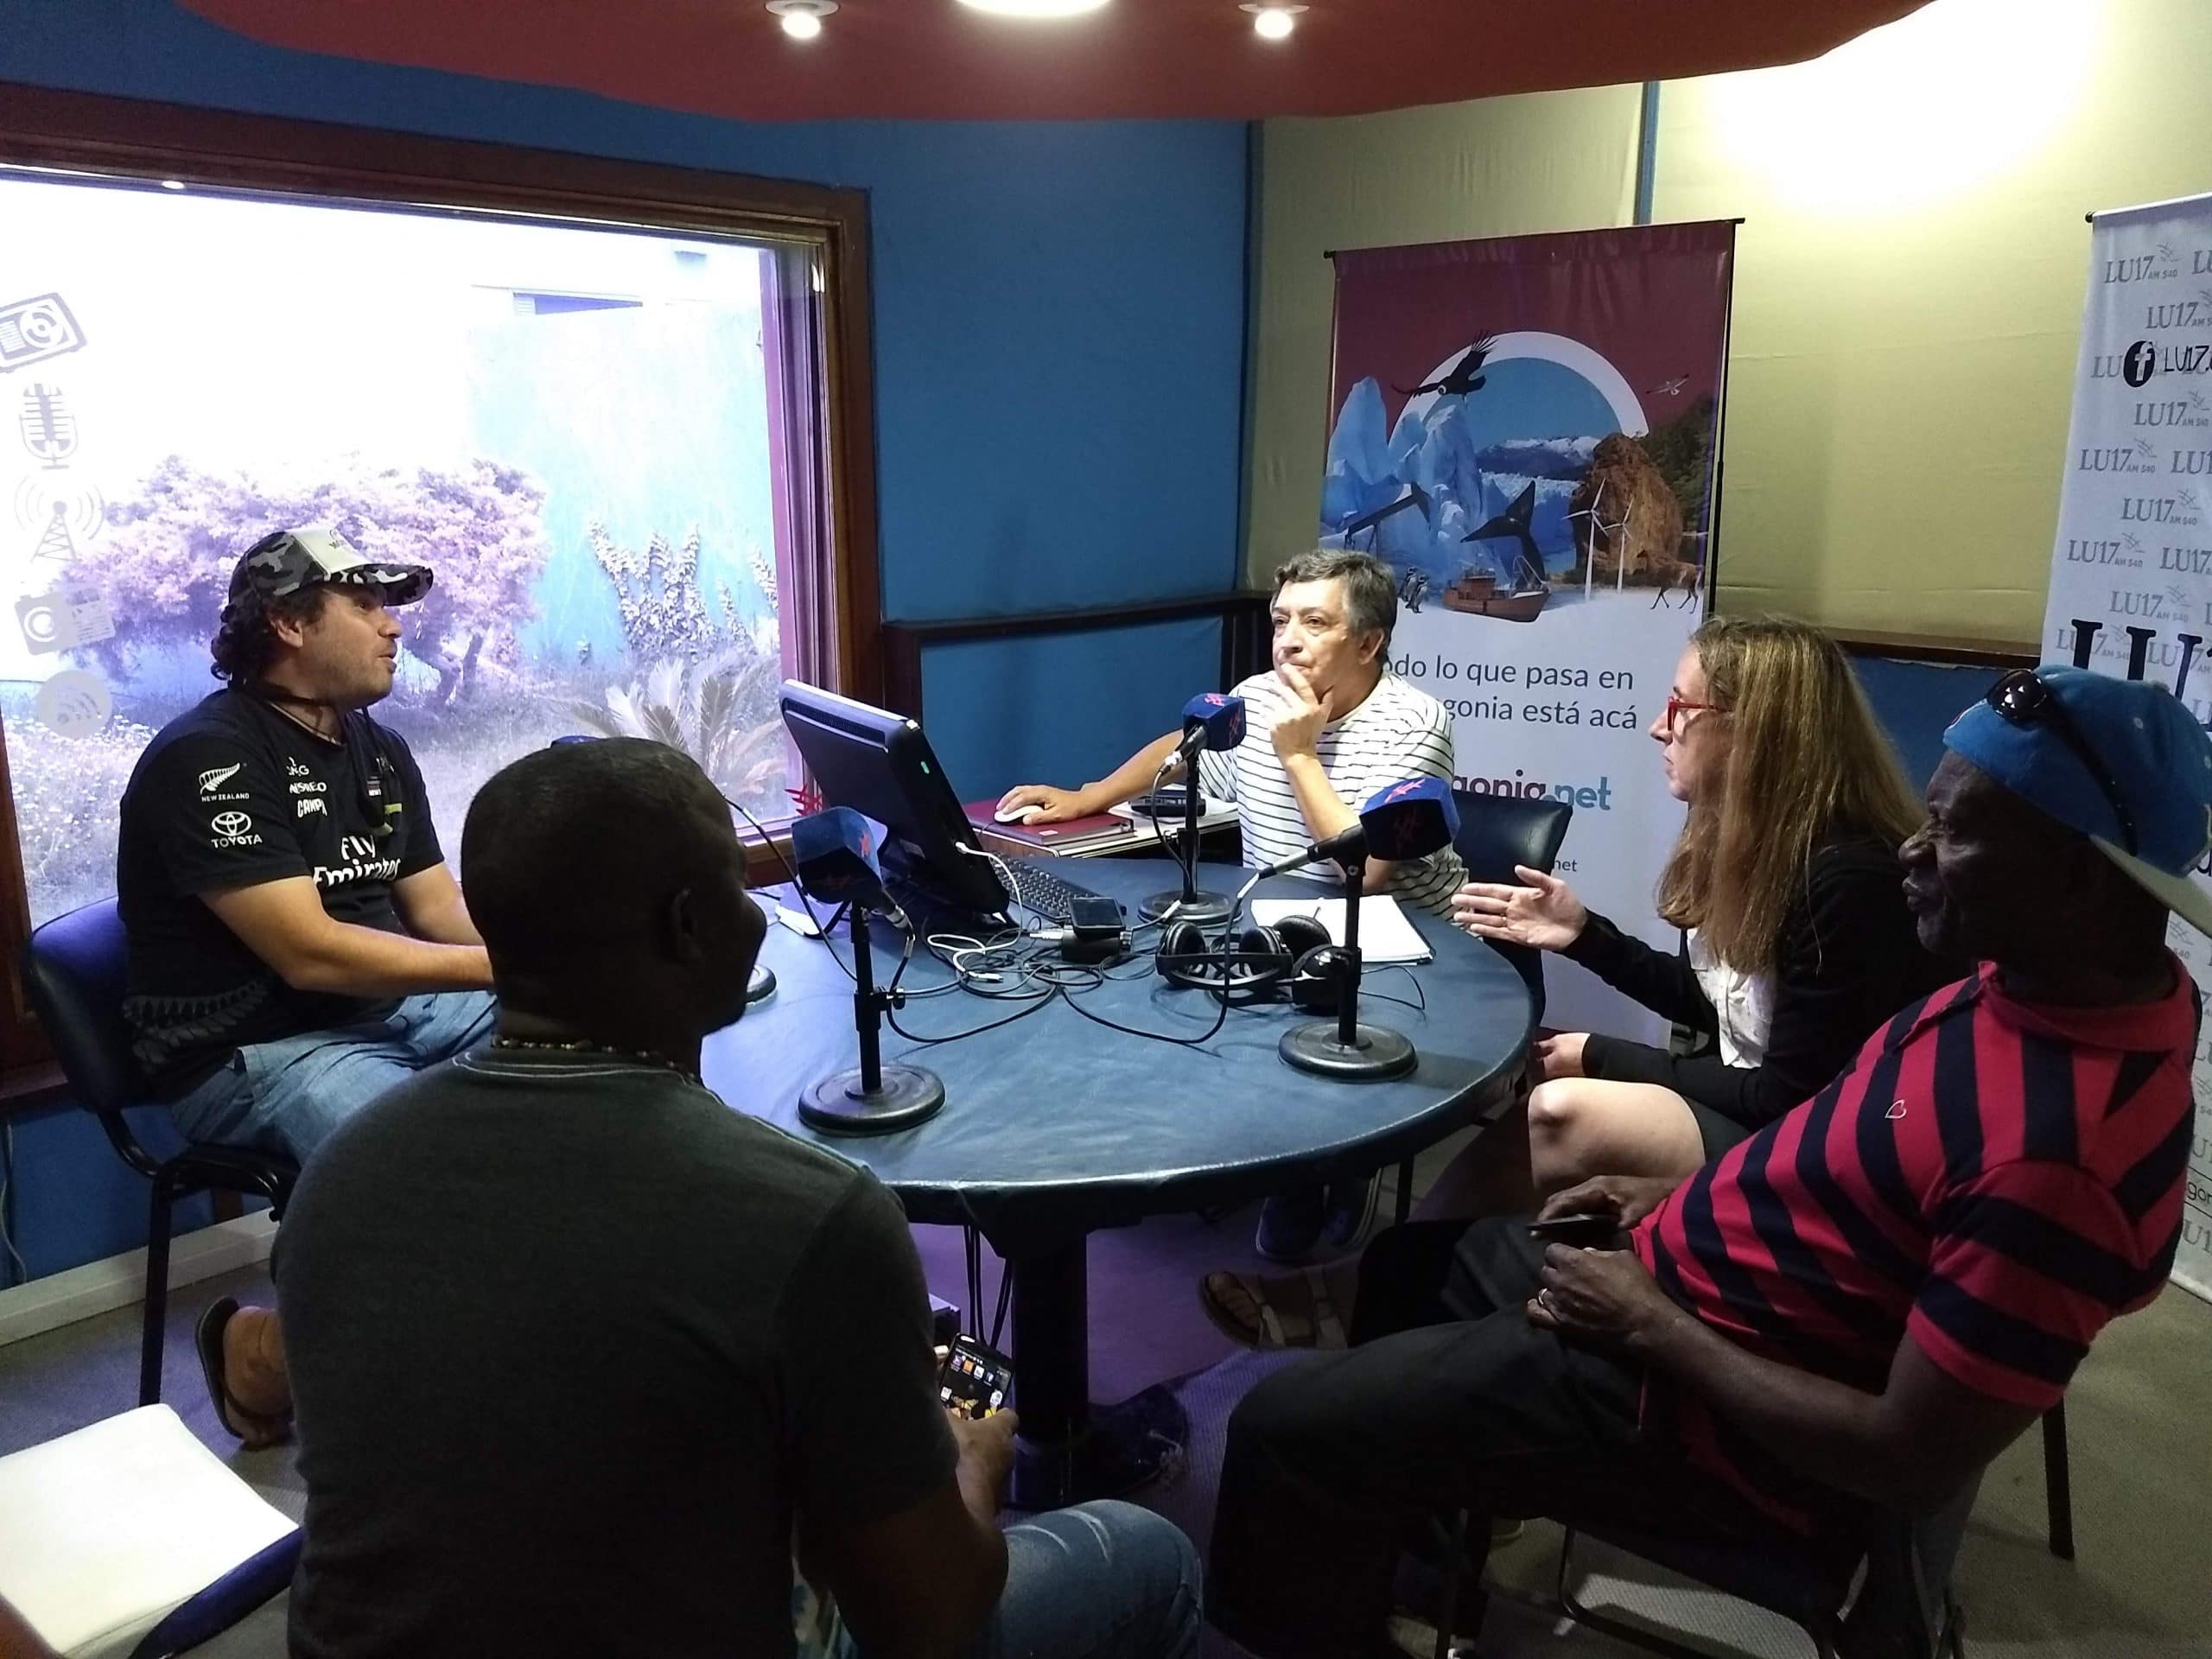 Lennox, Kirk and Carolina give a radio interview on a local station